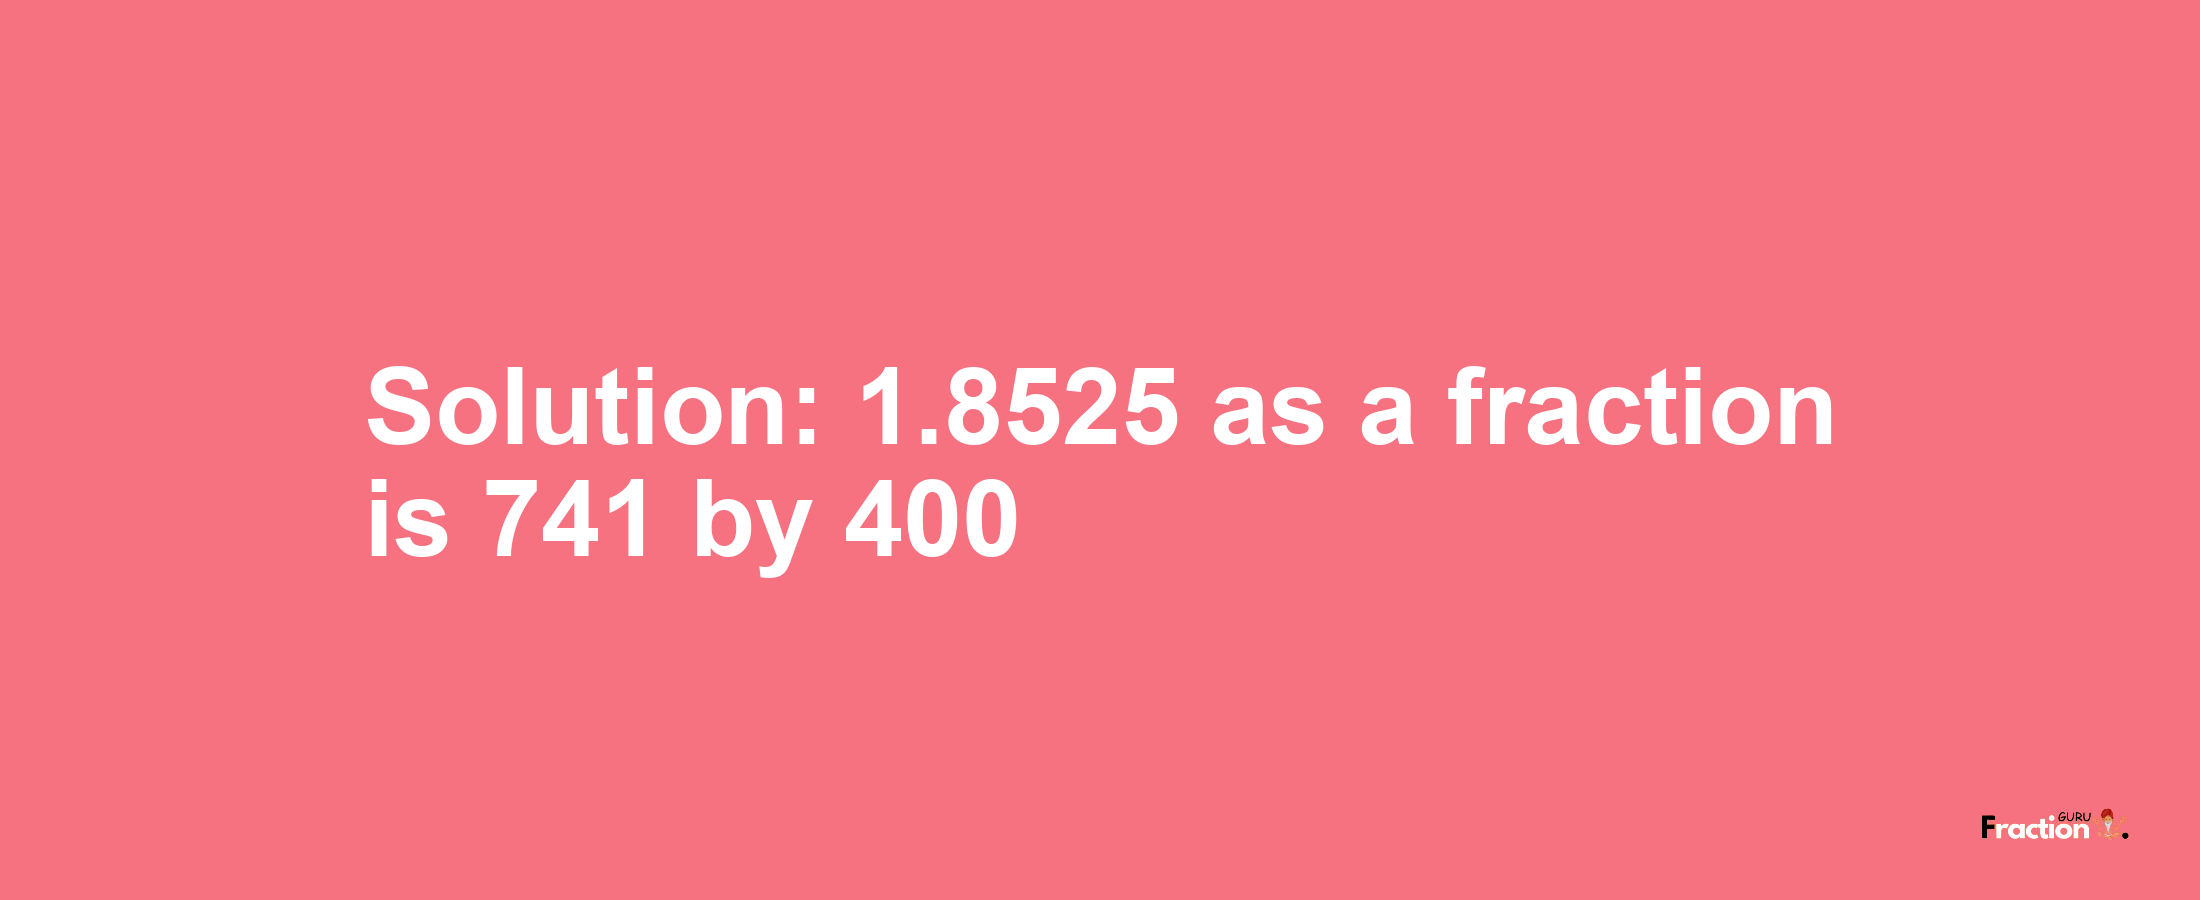 Solution:1.8525 as a fraction is 741/400